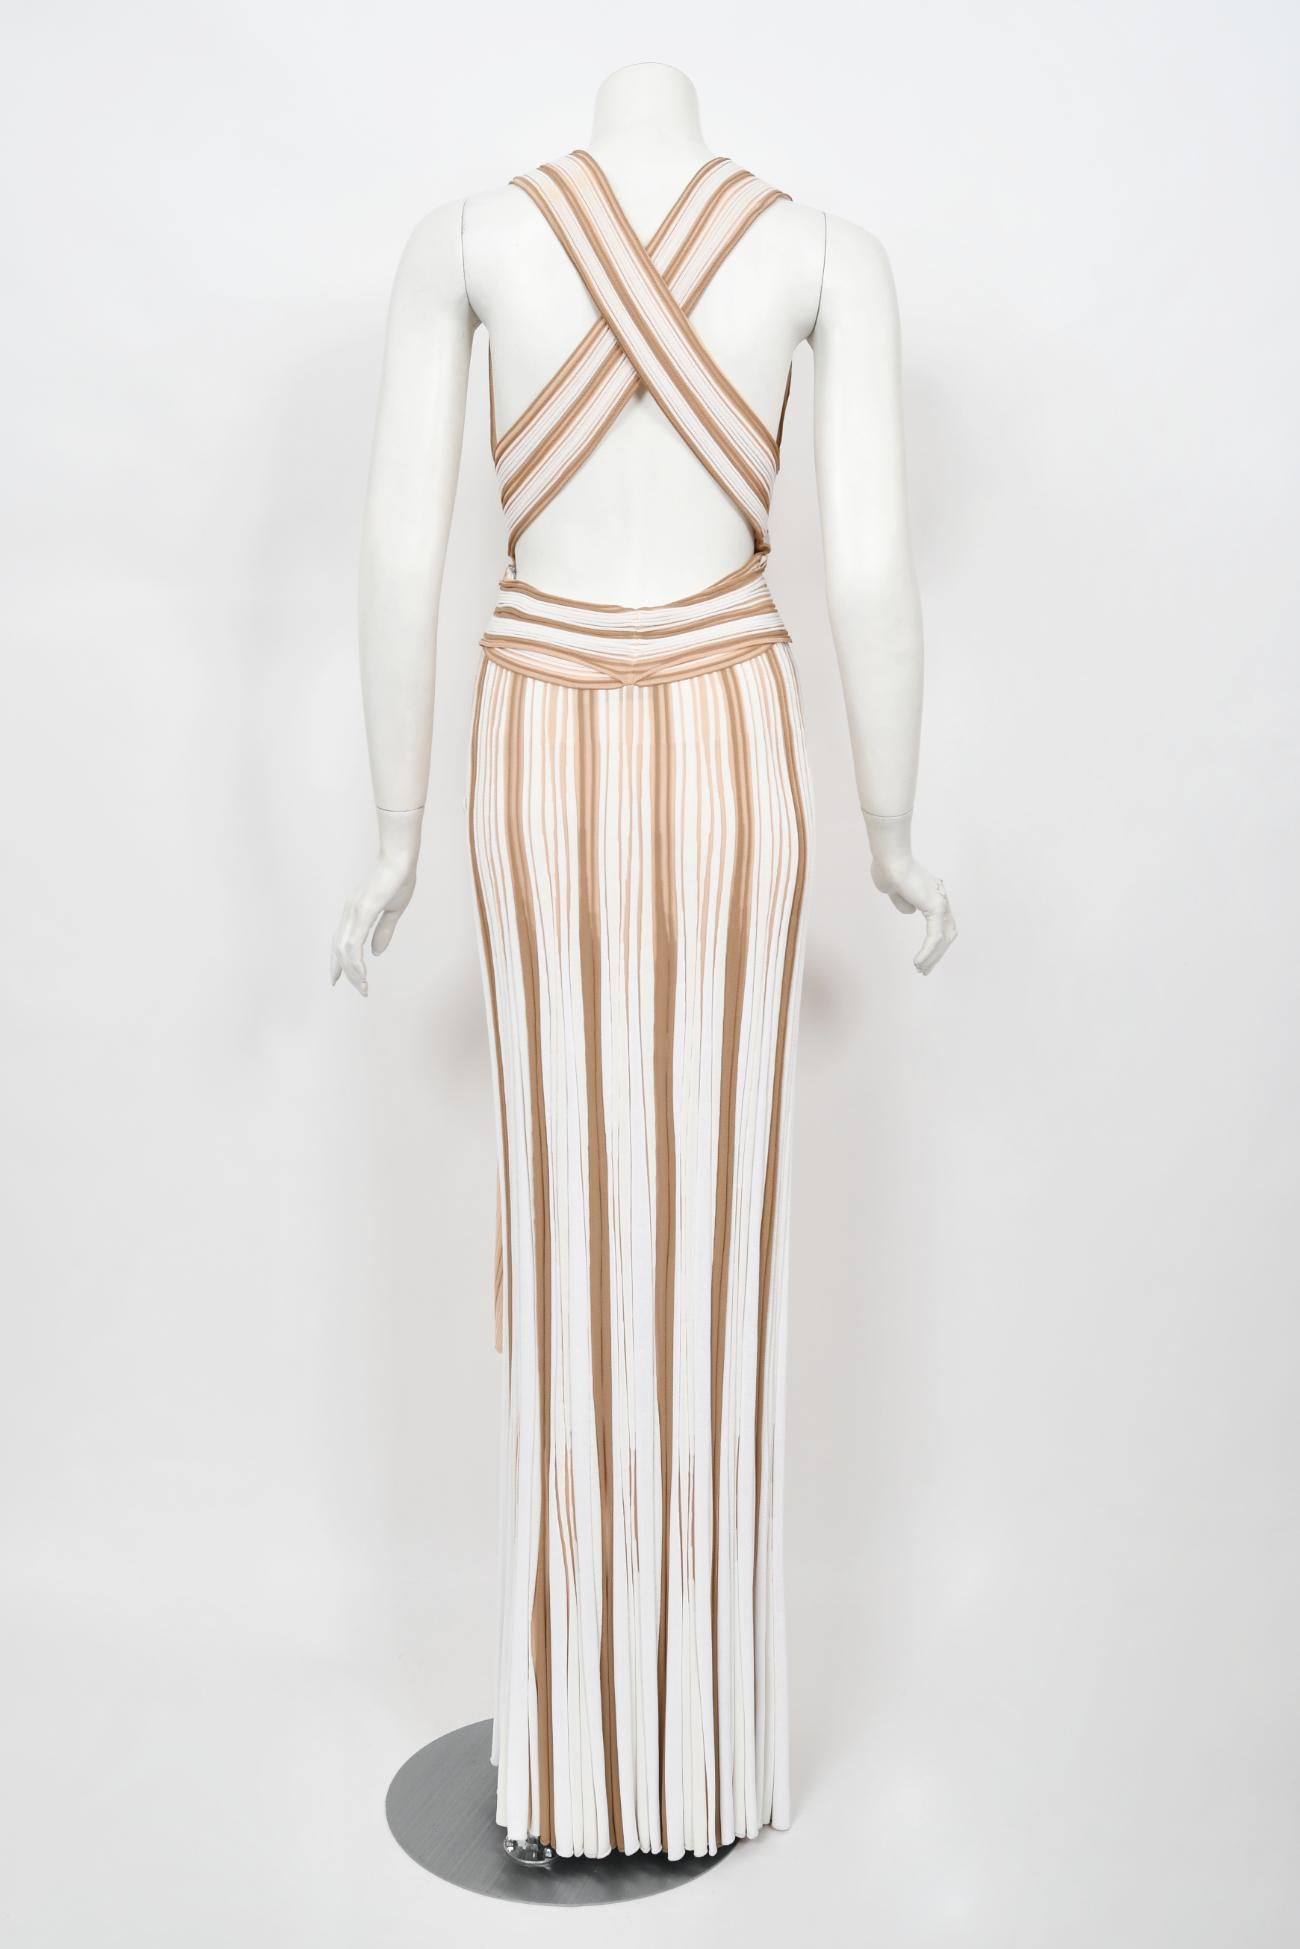 2002 Christian Dior by John Galliano Striped Stretch Knit Low-Plunge Maxi Dress For Sale 10